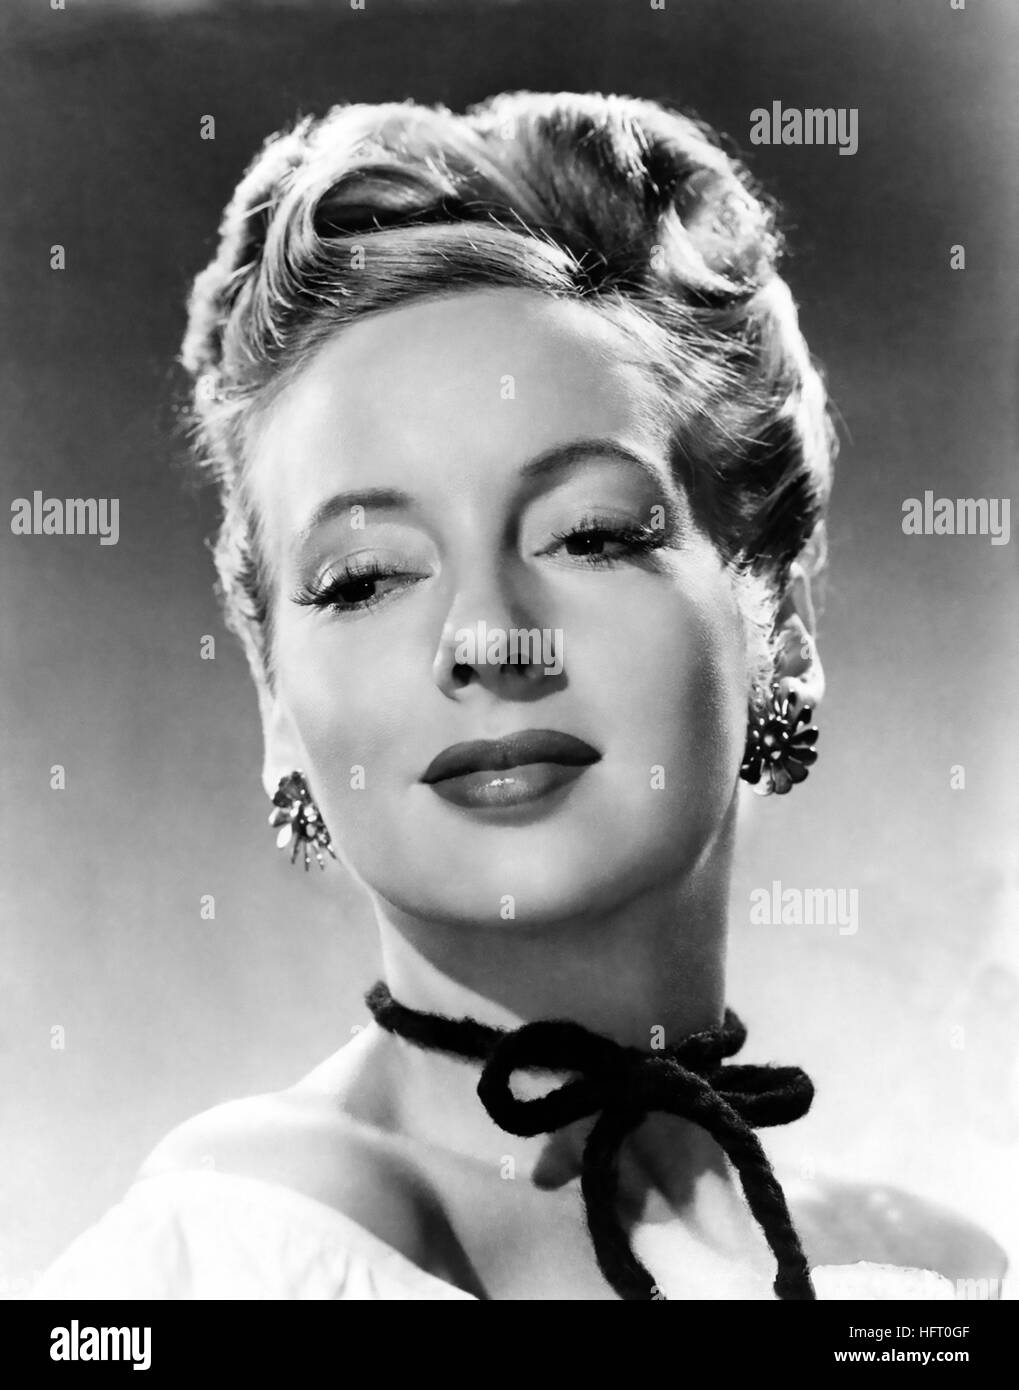 JOHNNY O'Clock 1947 Columbia Pictures Film con Evelyn Keyes Foto de stock